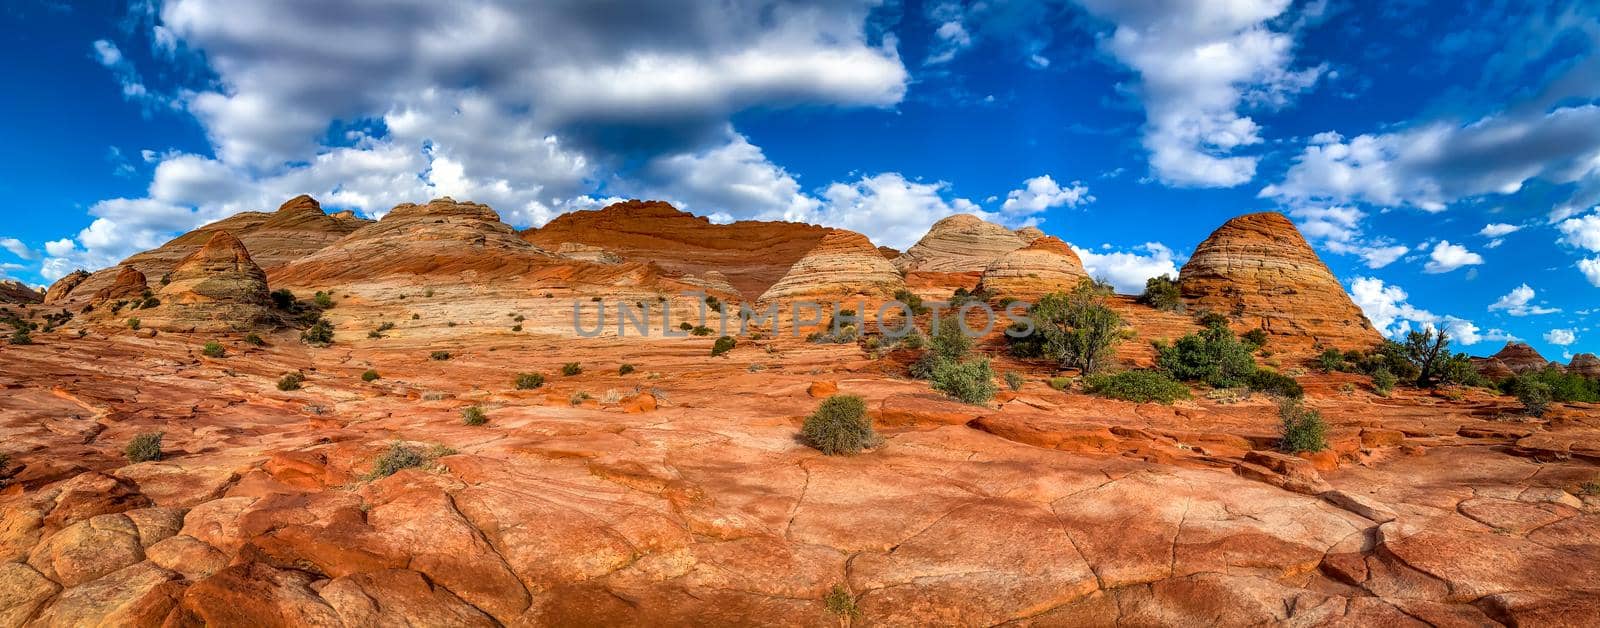 Sandstone formations in Coyote Butte North by gepeng